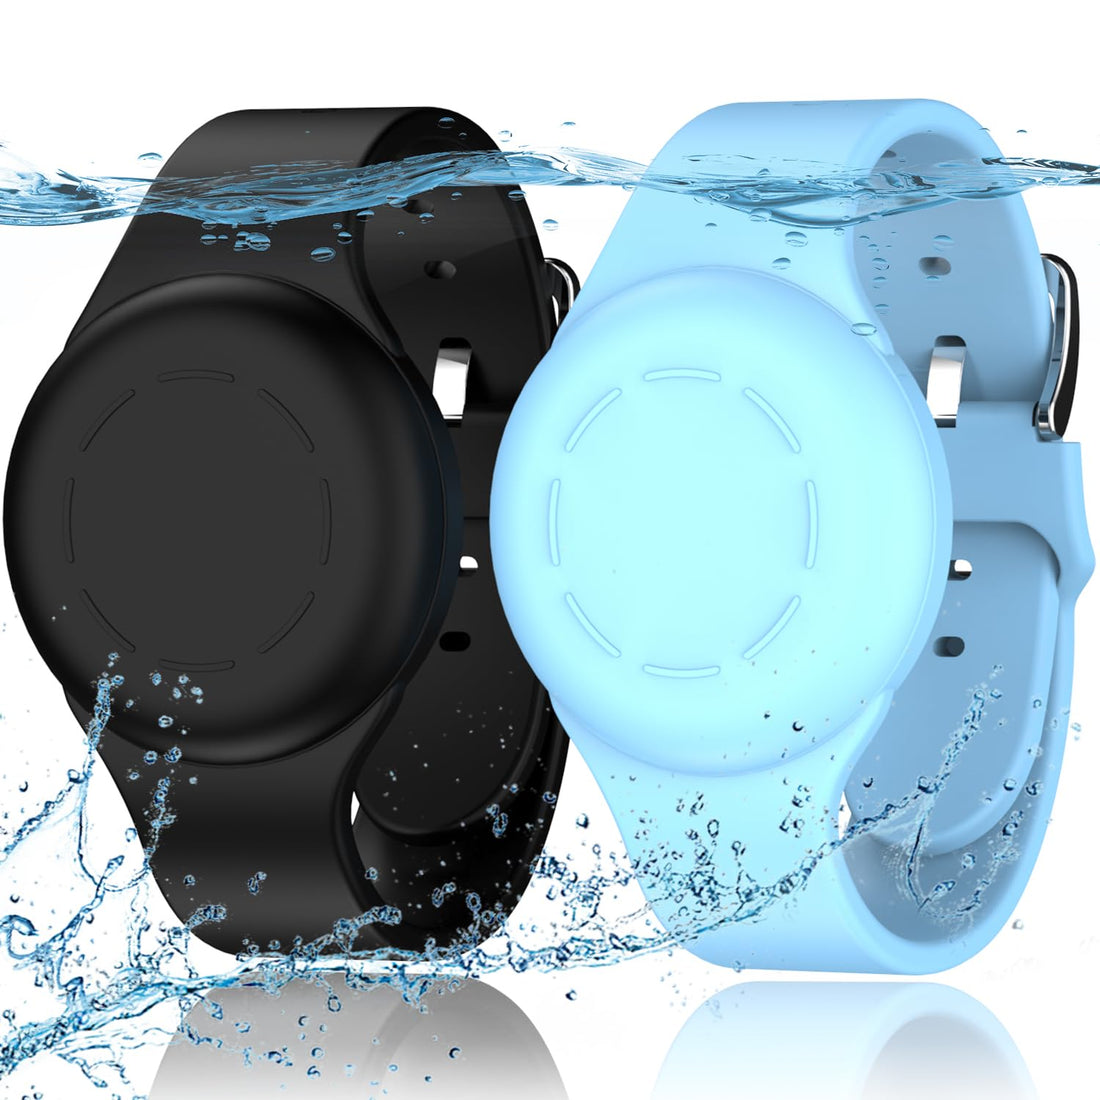 R-fun Waterproof Air Tag Bracelets for Kids [2 Pack] Compatible with Apple Air Tag Tracker with Soft Silicone,Anti Lost GPS Trackers Case Cover for Kids,Black/Glow Blue